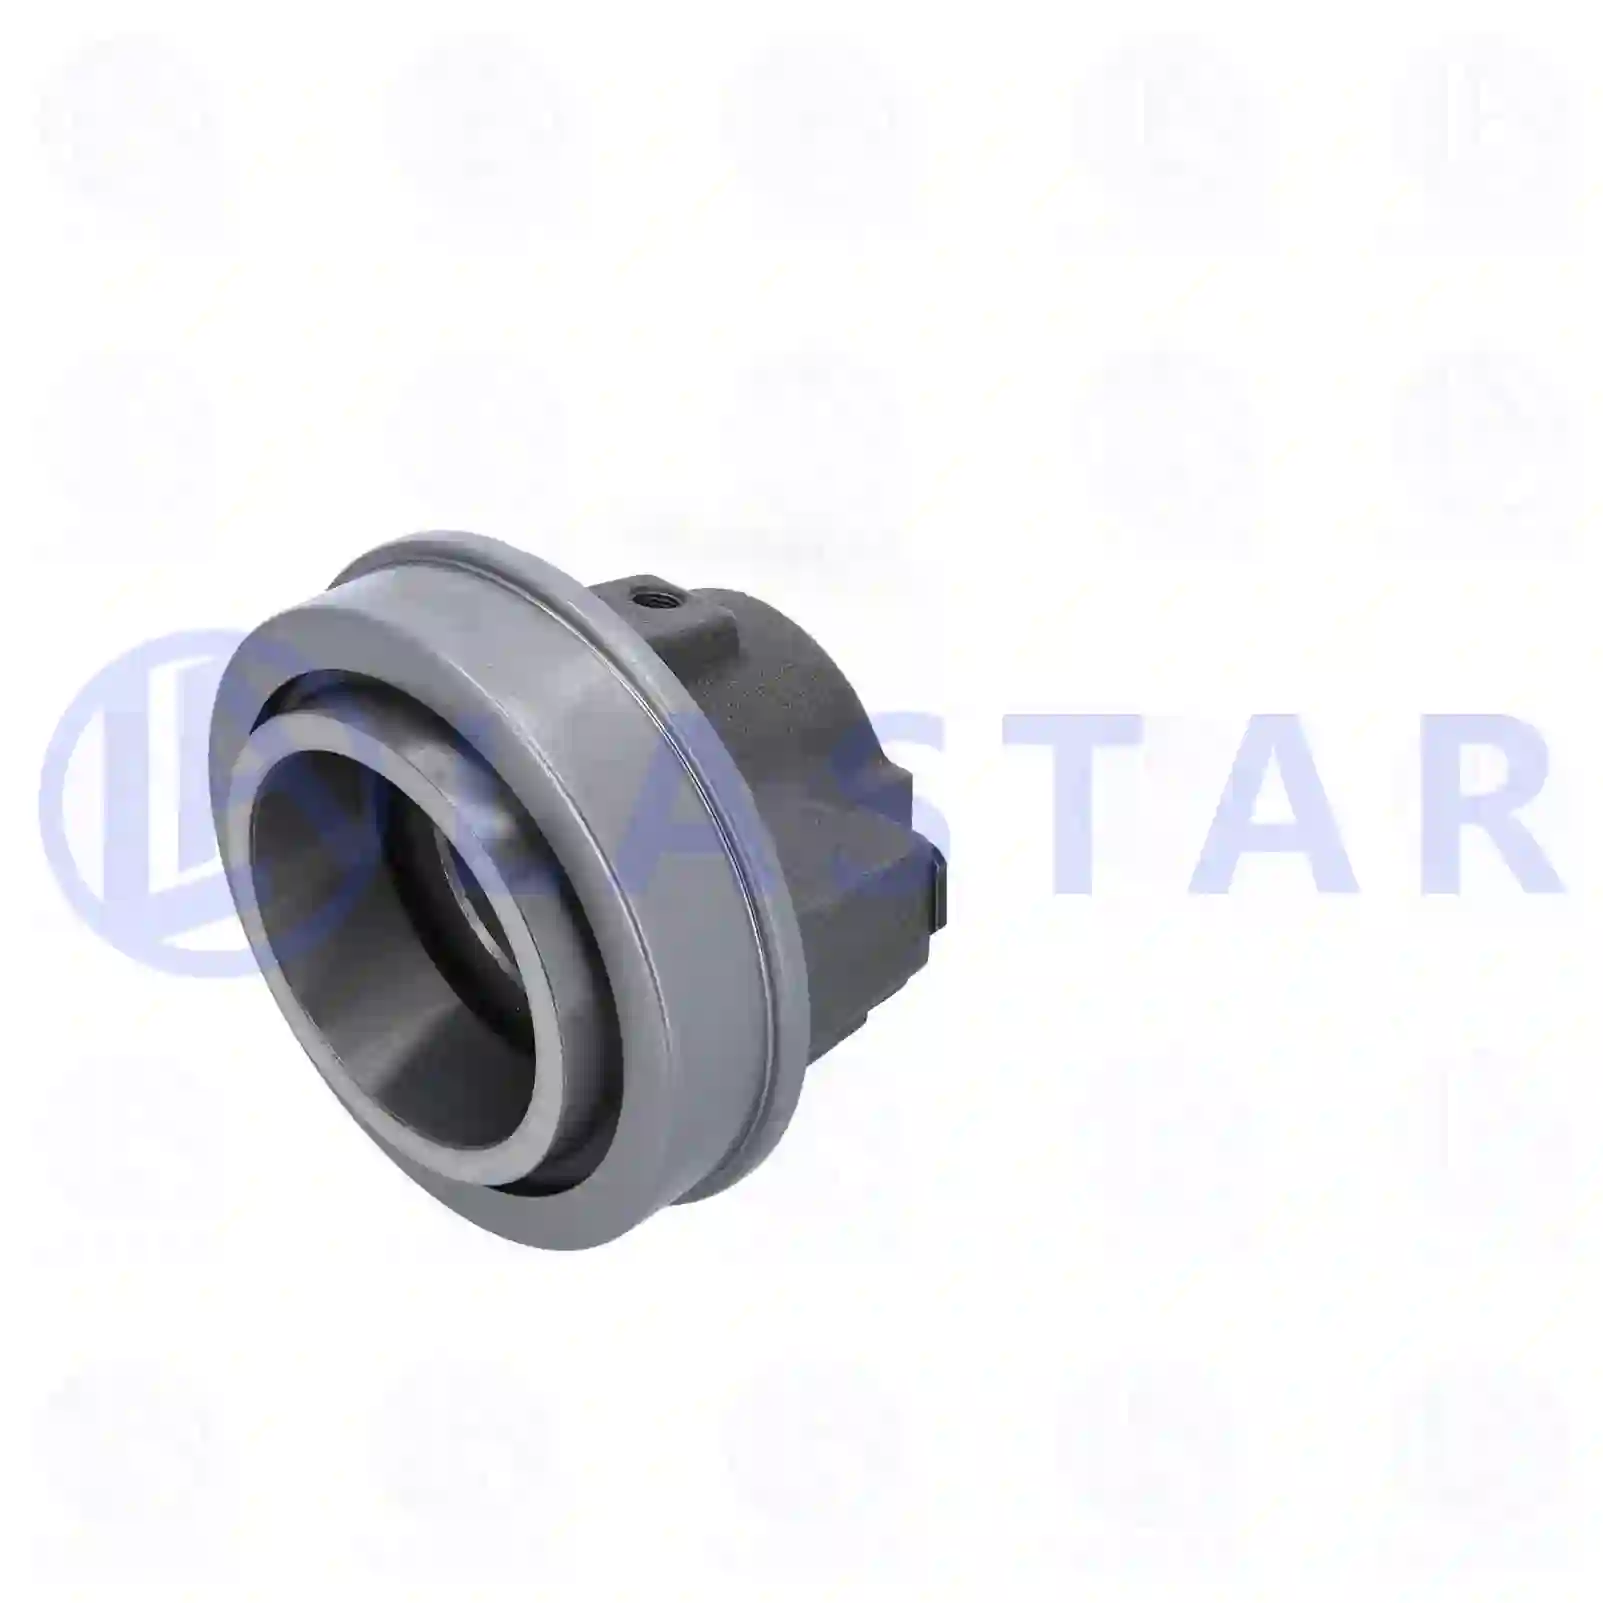 Release bearing, 77723130, 1367604, 352750, ZG30338-0008 ||  77723130 Lastar Spare Part | Truck Spare Parts, Auotomotive Spare Parts Release bearing, 77723130, 1367604, 352750, ZG30338-0008 ||  77723130 Lastar Spare Part | Truck Spare Parts, Auotomotive Spare Parts